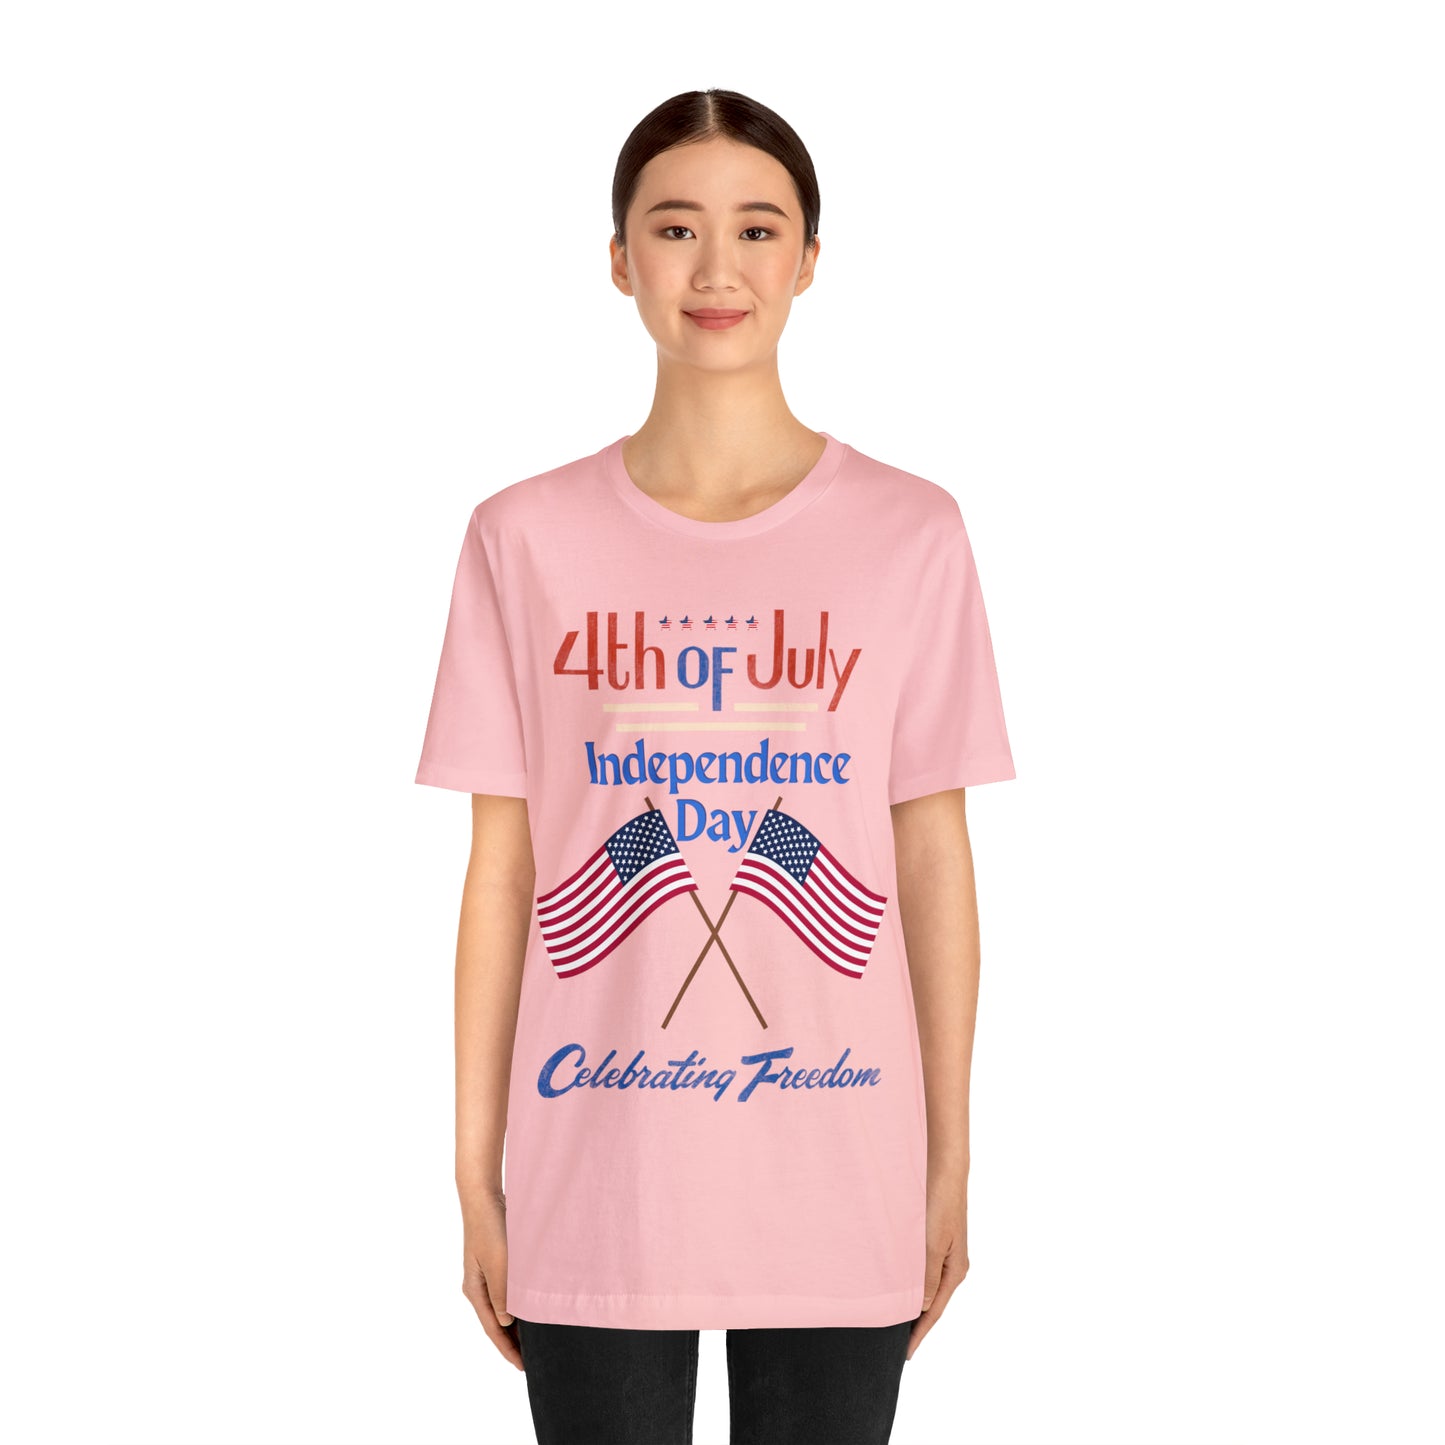 Express Your Patriotism with 4th of July Flag Shirt: Independence Day, Fireworks, Celebrating Freedom - Perfect for Women and Men